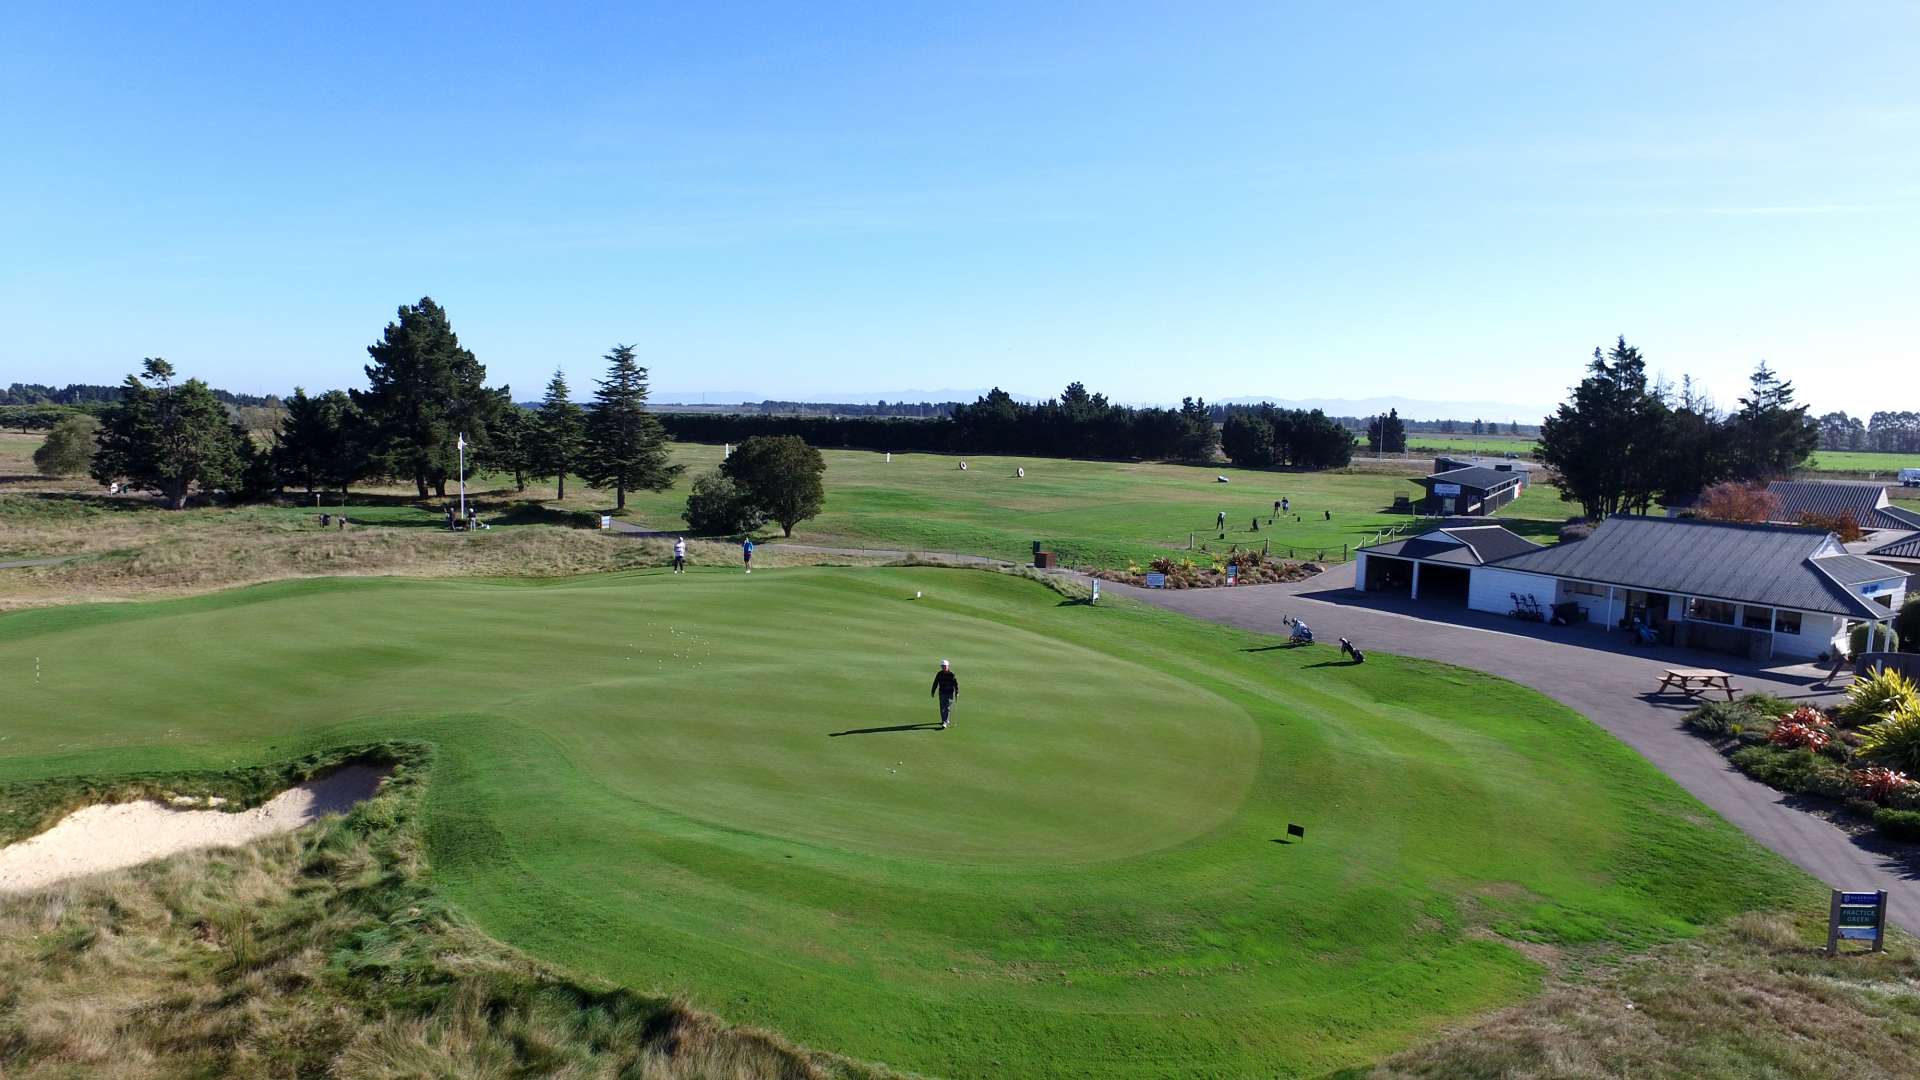 Christchurch Premium Golf Course Remodelled in 2012 by Renowned Golf Architects Turner McPherson